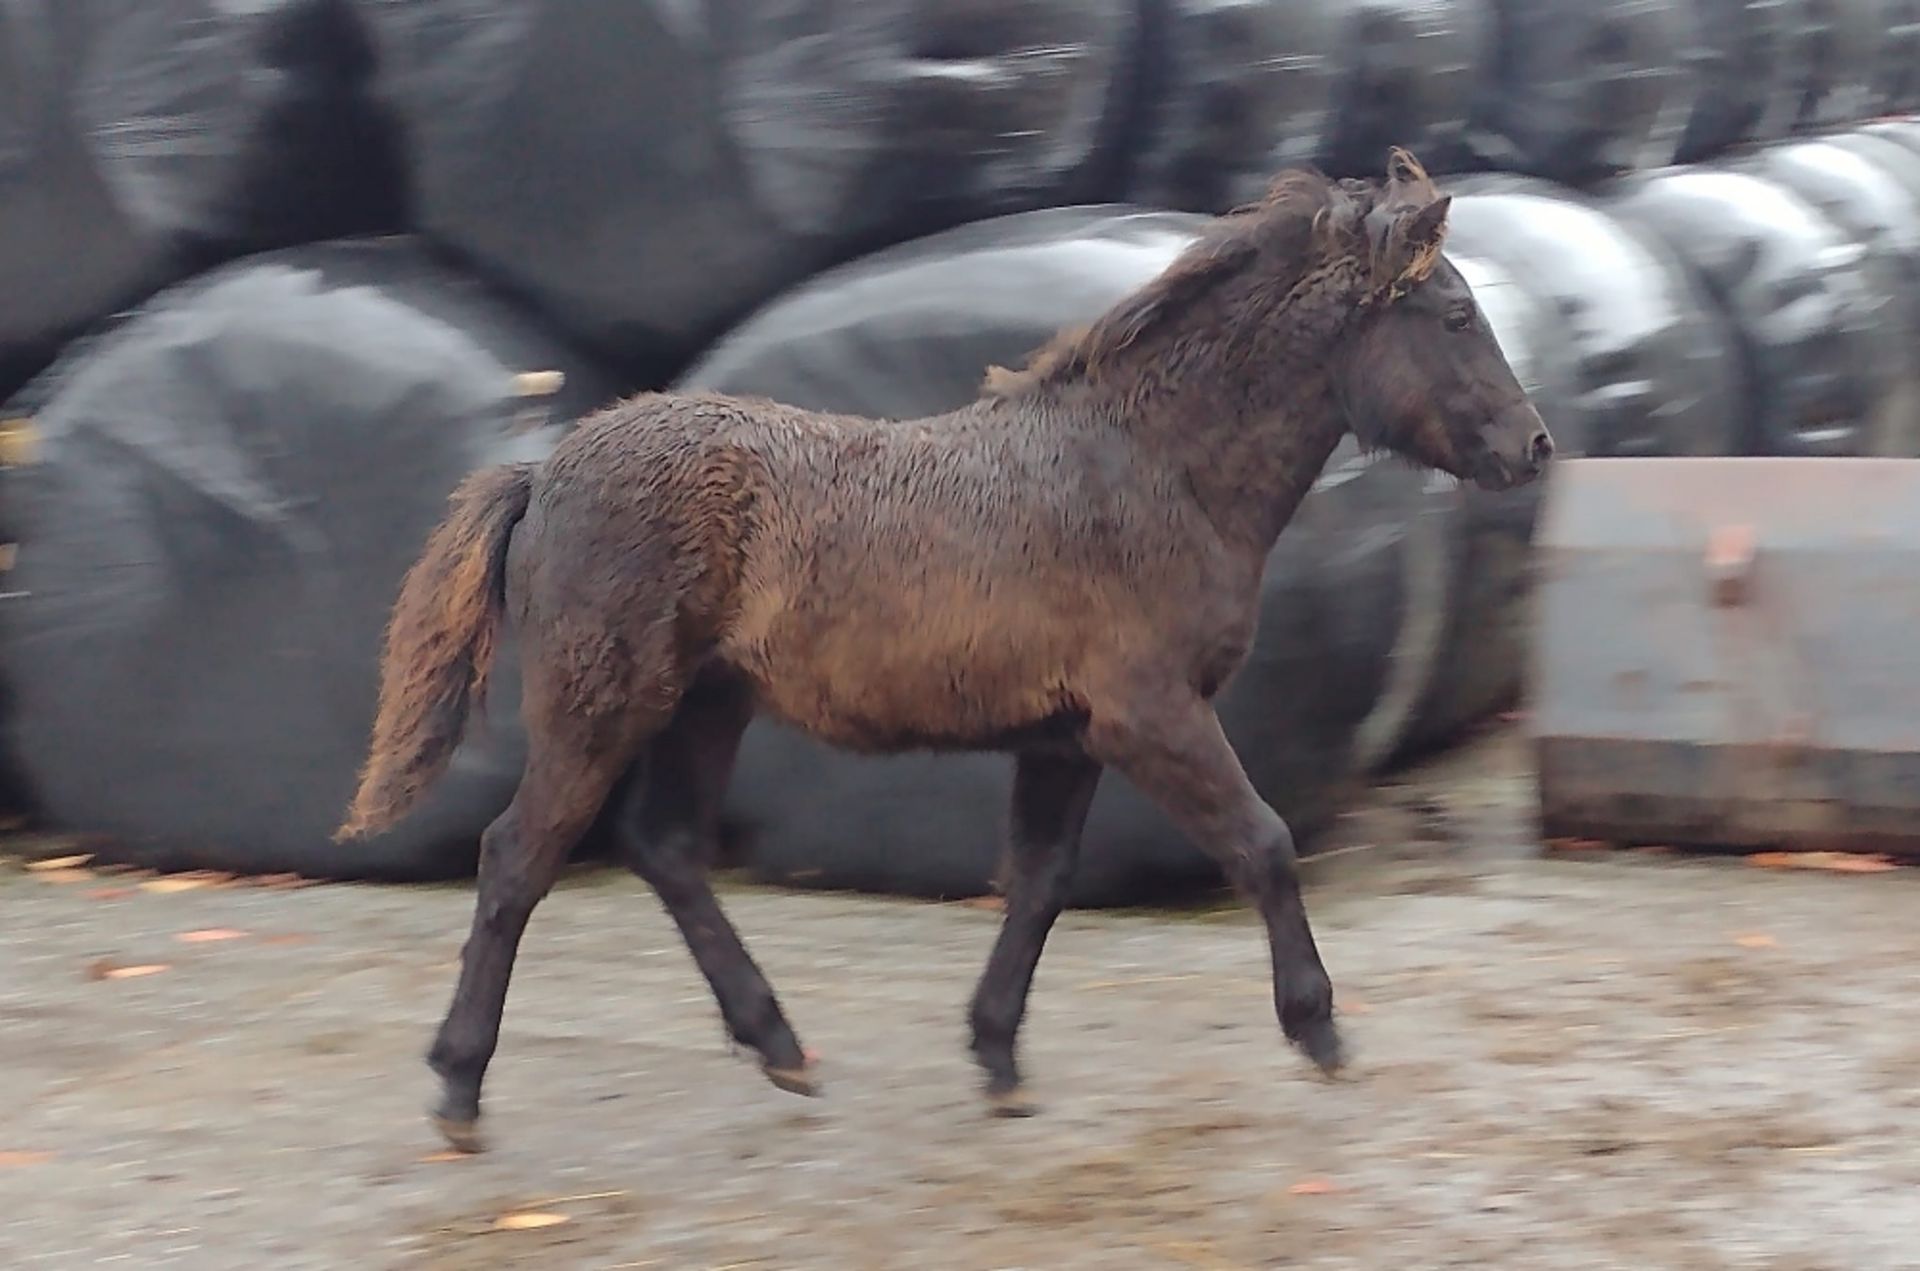 'BLACKATOR KEIRA' DARTMOOR HILL PONY DARK BAY FILLY APPROX 6 MONTHS OLD - Image 2 of 10